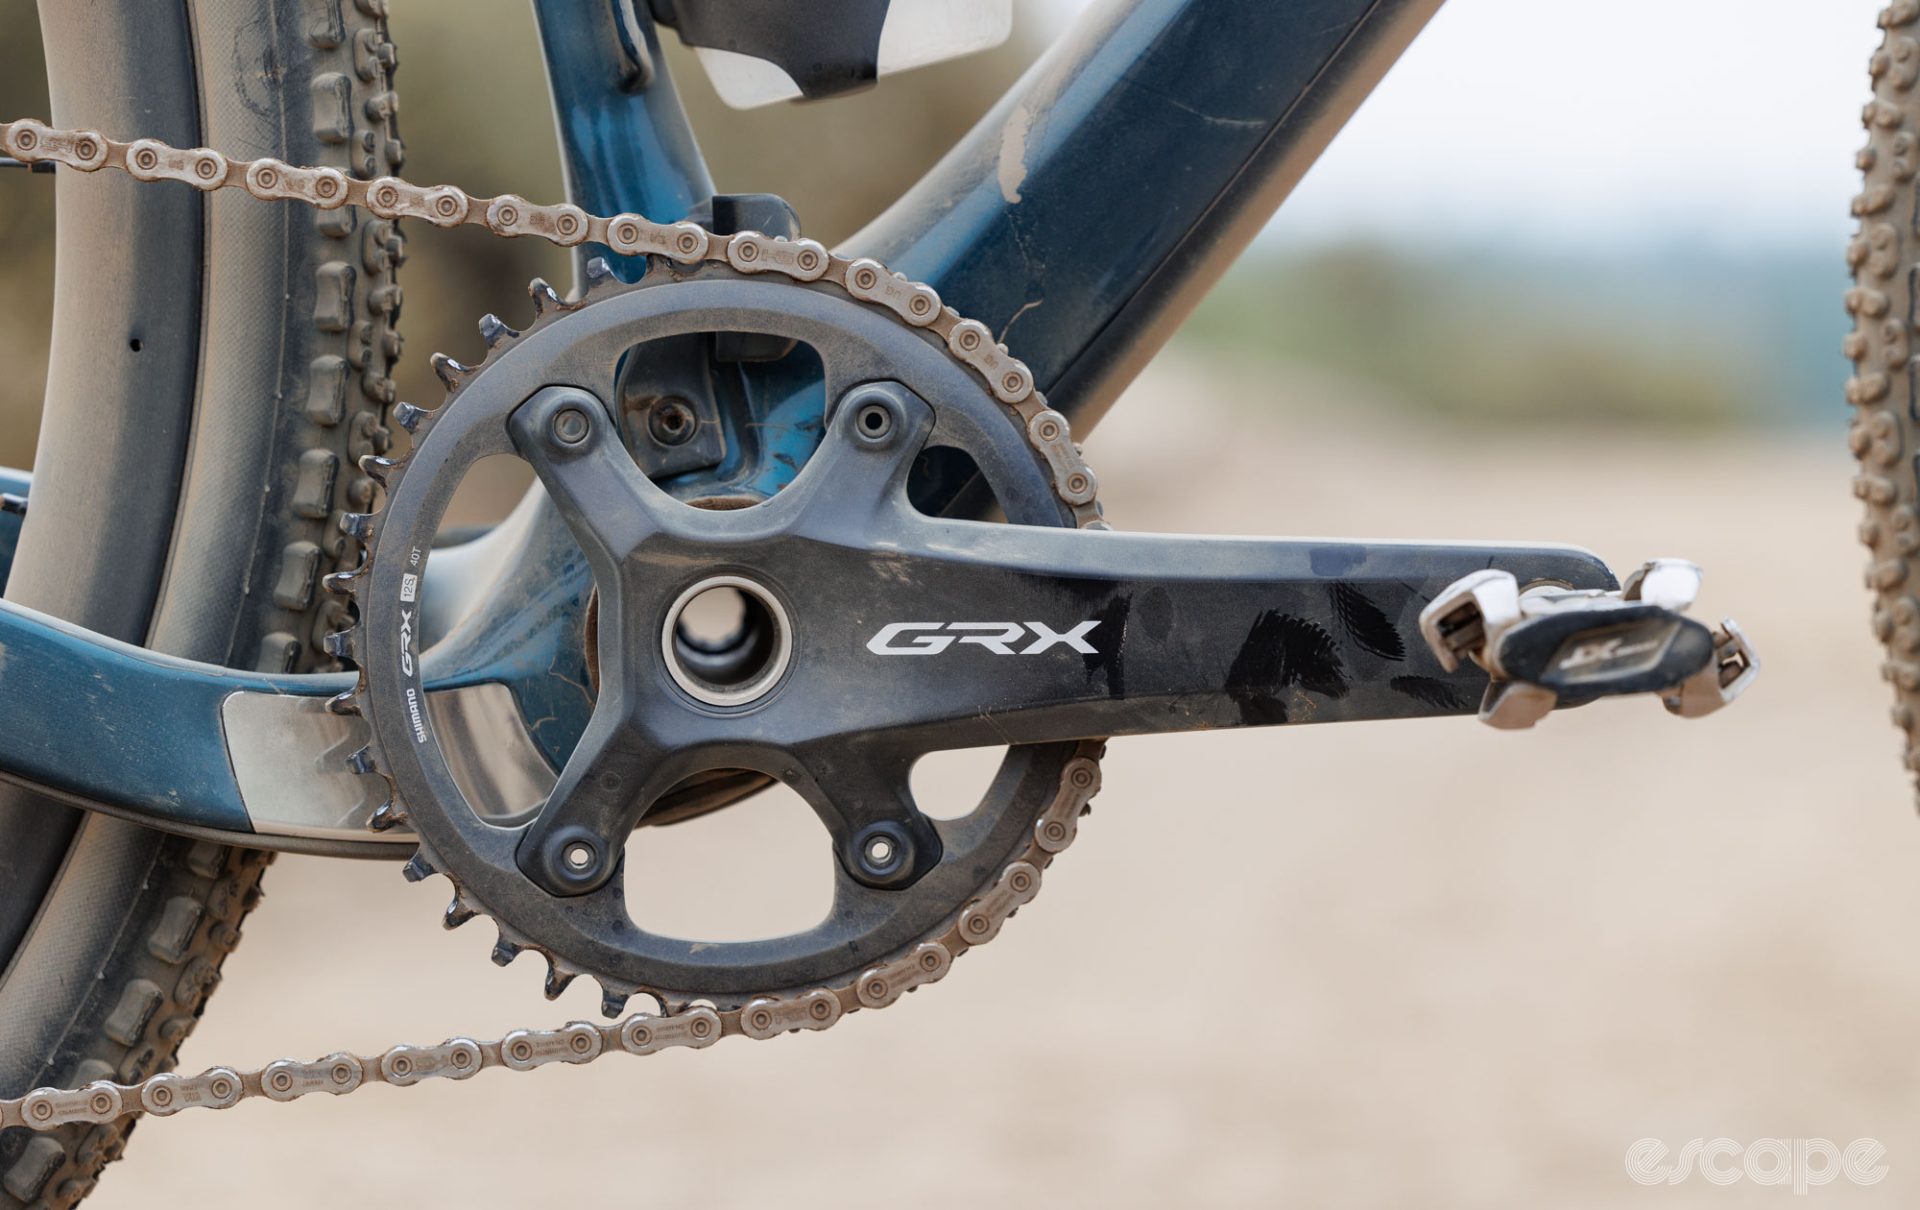 Shimano GRX crankset with 40T chainring. 